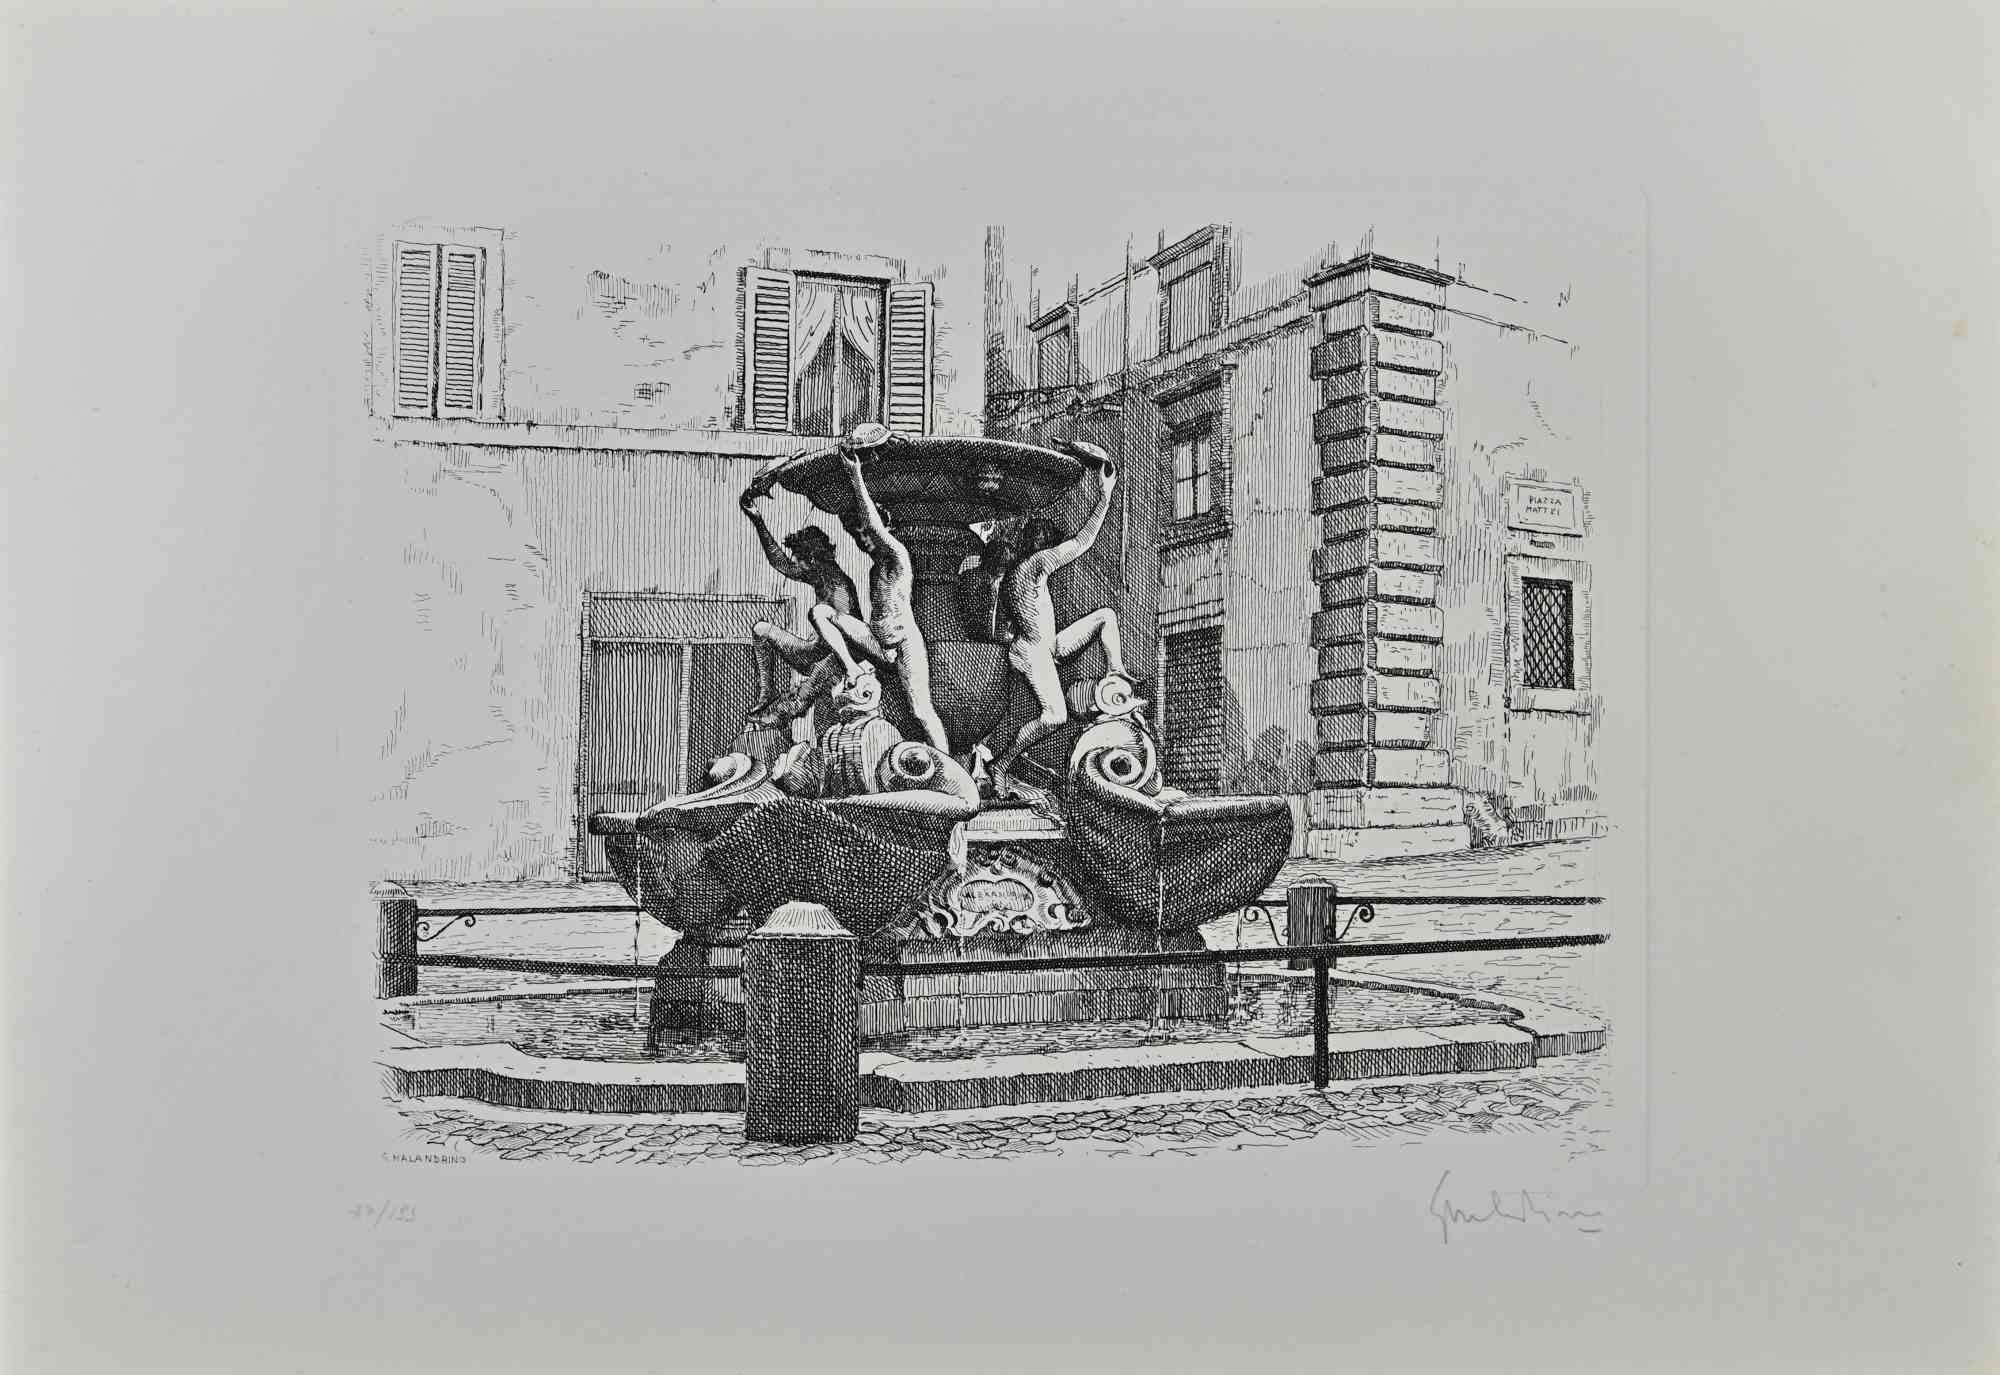 Turtle Fountain - Rome is an original artwork realized by Giuseppe Malandrino.

Original print in etching technique.

Hand-signed by the artist in pencil on the lower right corner.

Numbered edition of 199 copies.

Good conditions. 

This artwork